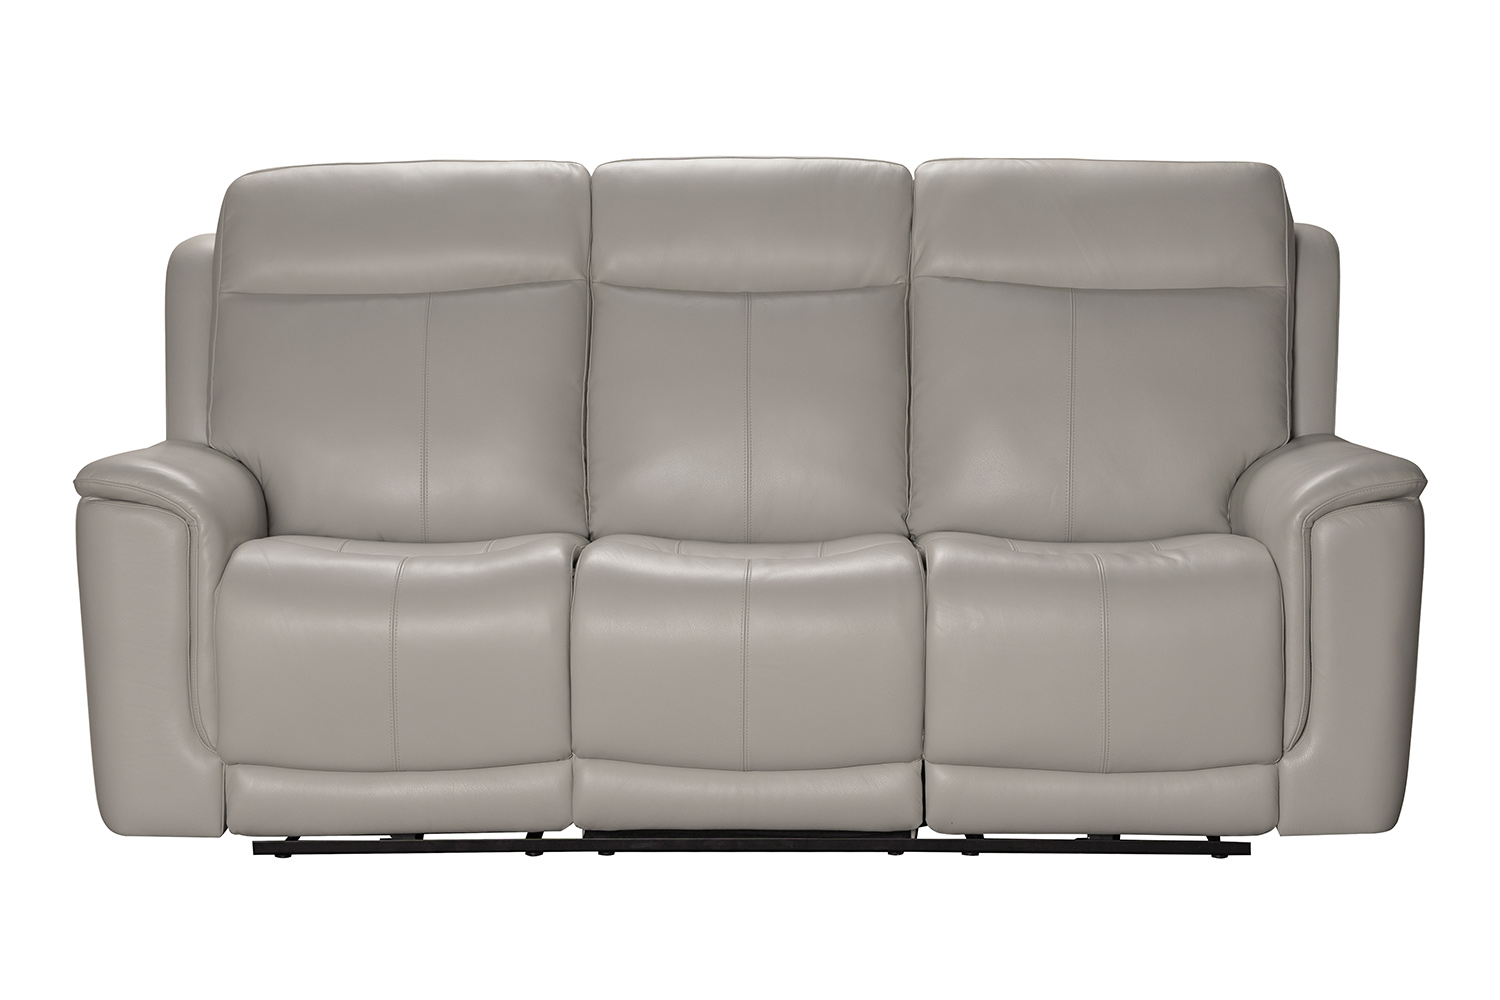 Barcalounger Burbank Power Reclining Sofa with Power Head Rests and Lumbar - Laurel Cream/Leather match